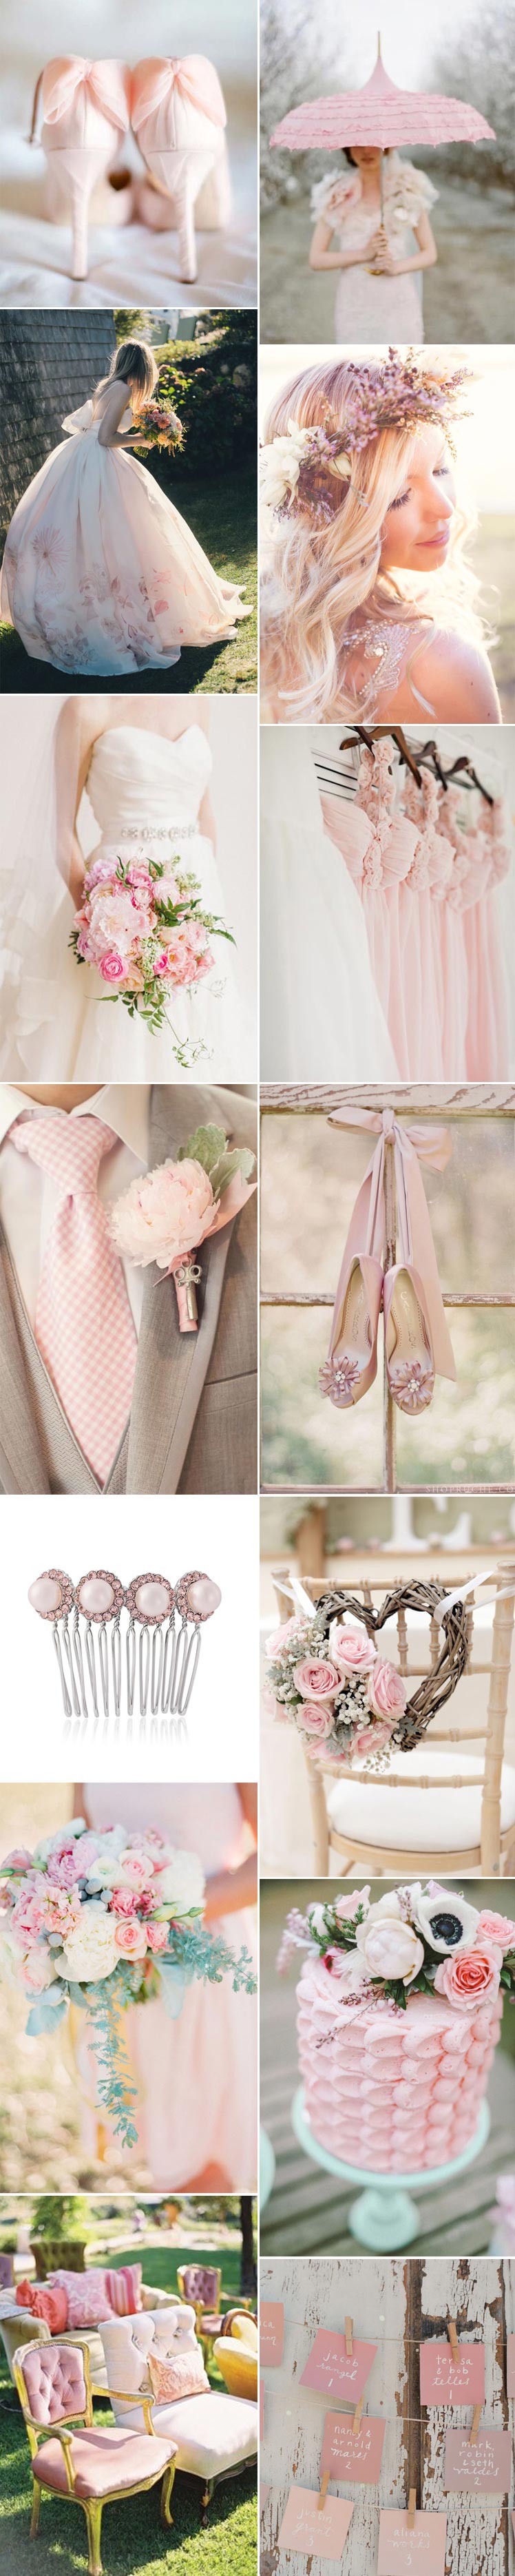 Perfect pink inspiration for your wedding colour scheme